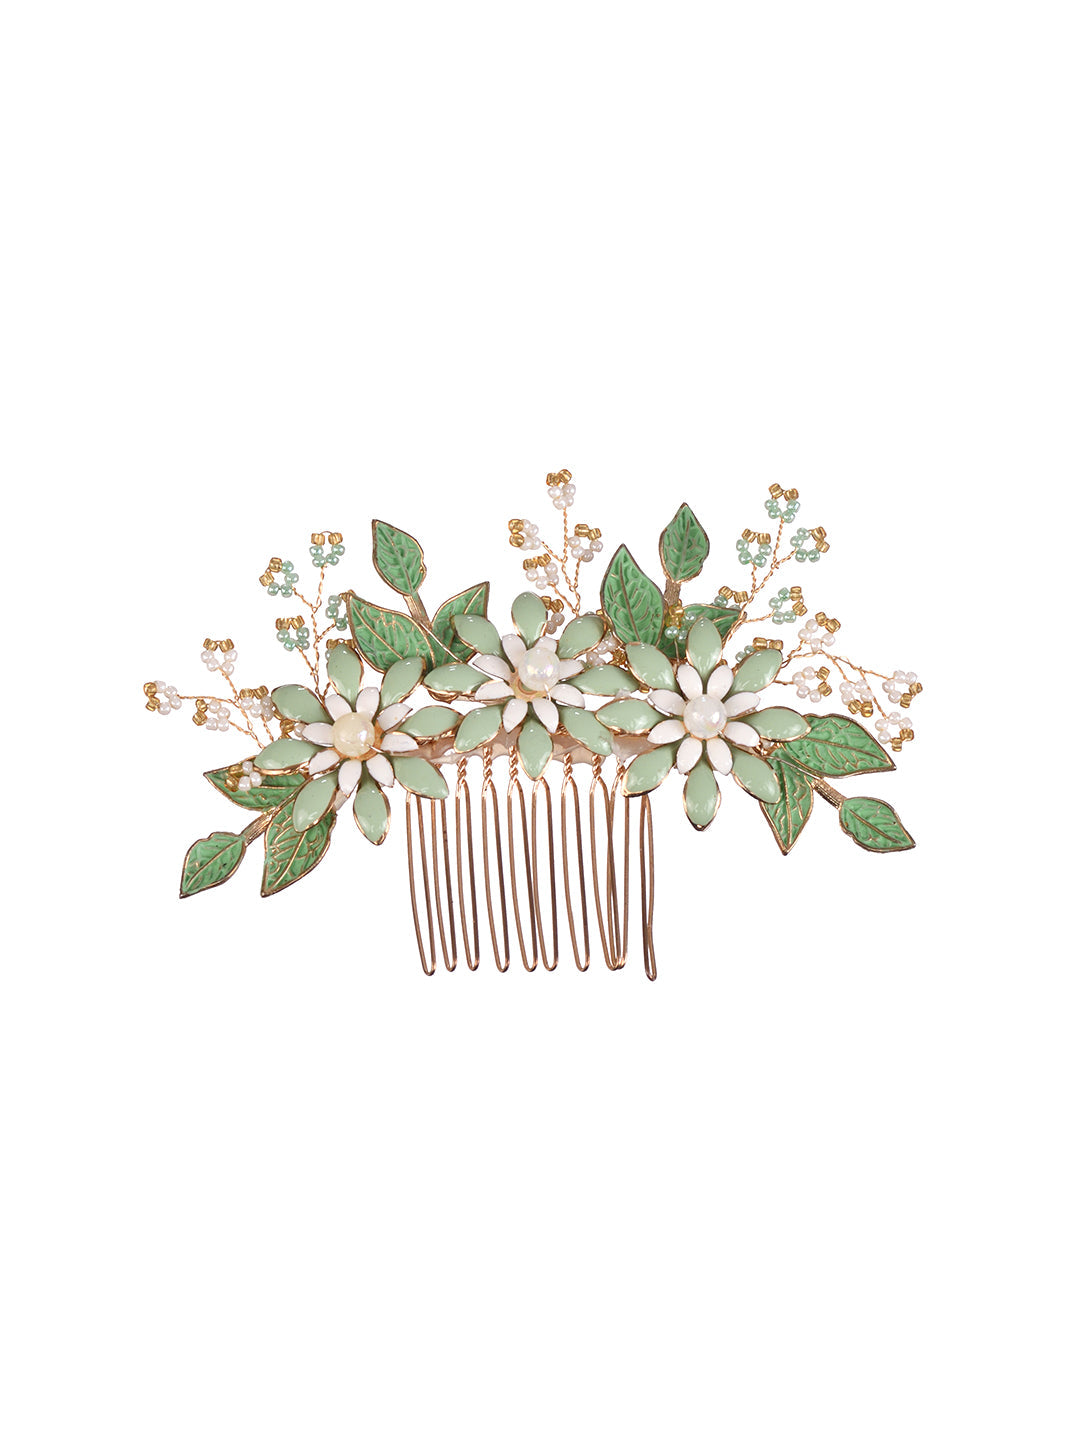 Green Gold Toned Enamelled Pearl Embellished Comb Pin, zaveri pearls, sale price rs, sale price, sale gold plated, sale gold, sale, rubans, ring, regular price, priyassi jewellery, kushal's -